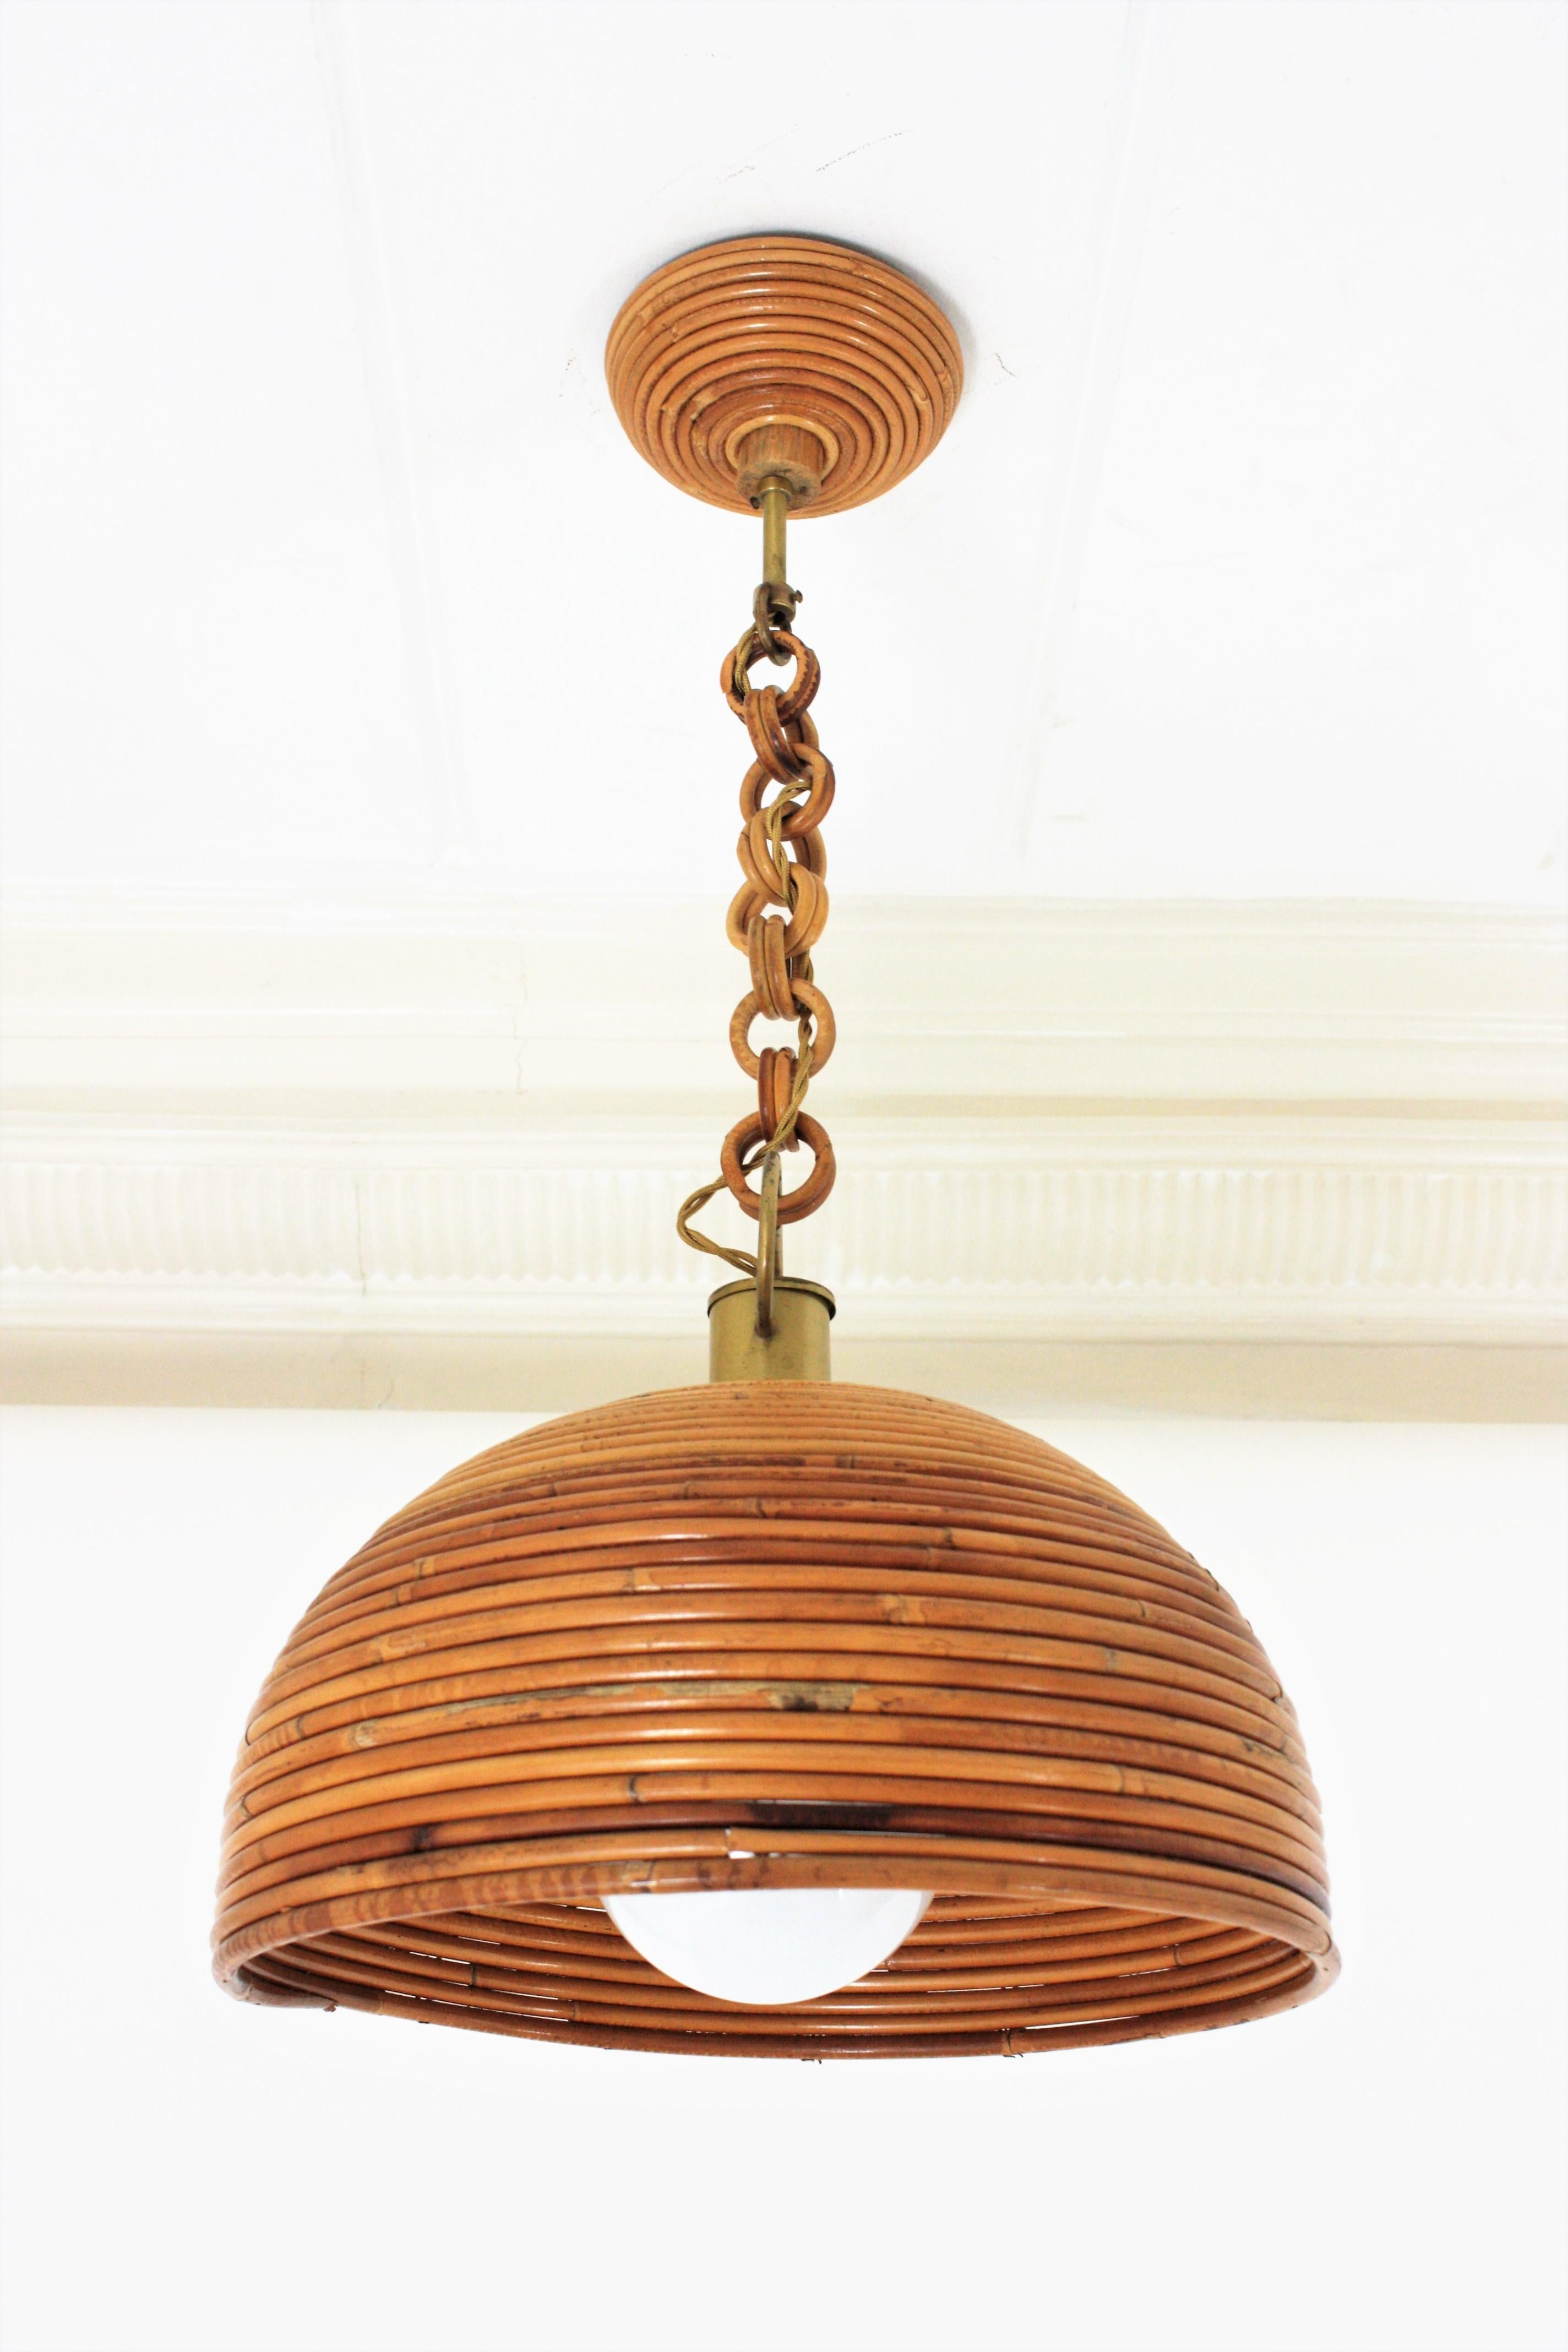 Mushroom shaped rattan pencil reed pendant or suspension light with brass accents, Italy, 1960s.
The design of this pendant is reminiscent of the Fungo model from the Rising Sun collection by Italian designer Gabriella Crespi. Attributed to Vivai